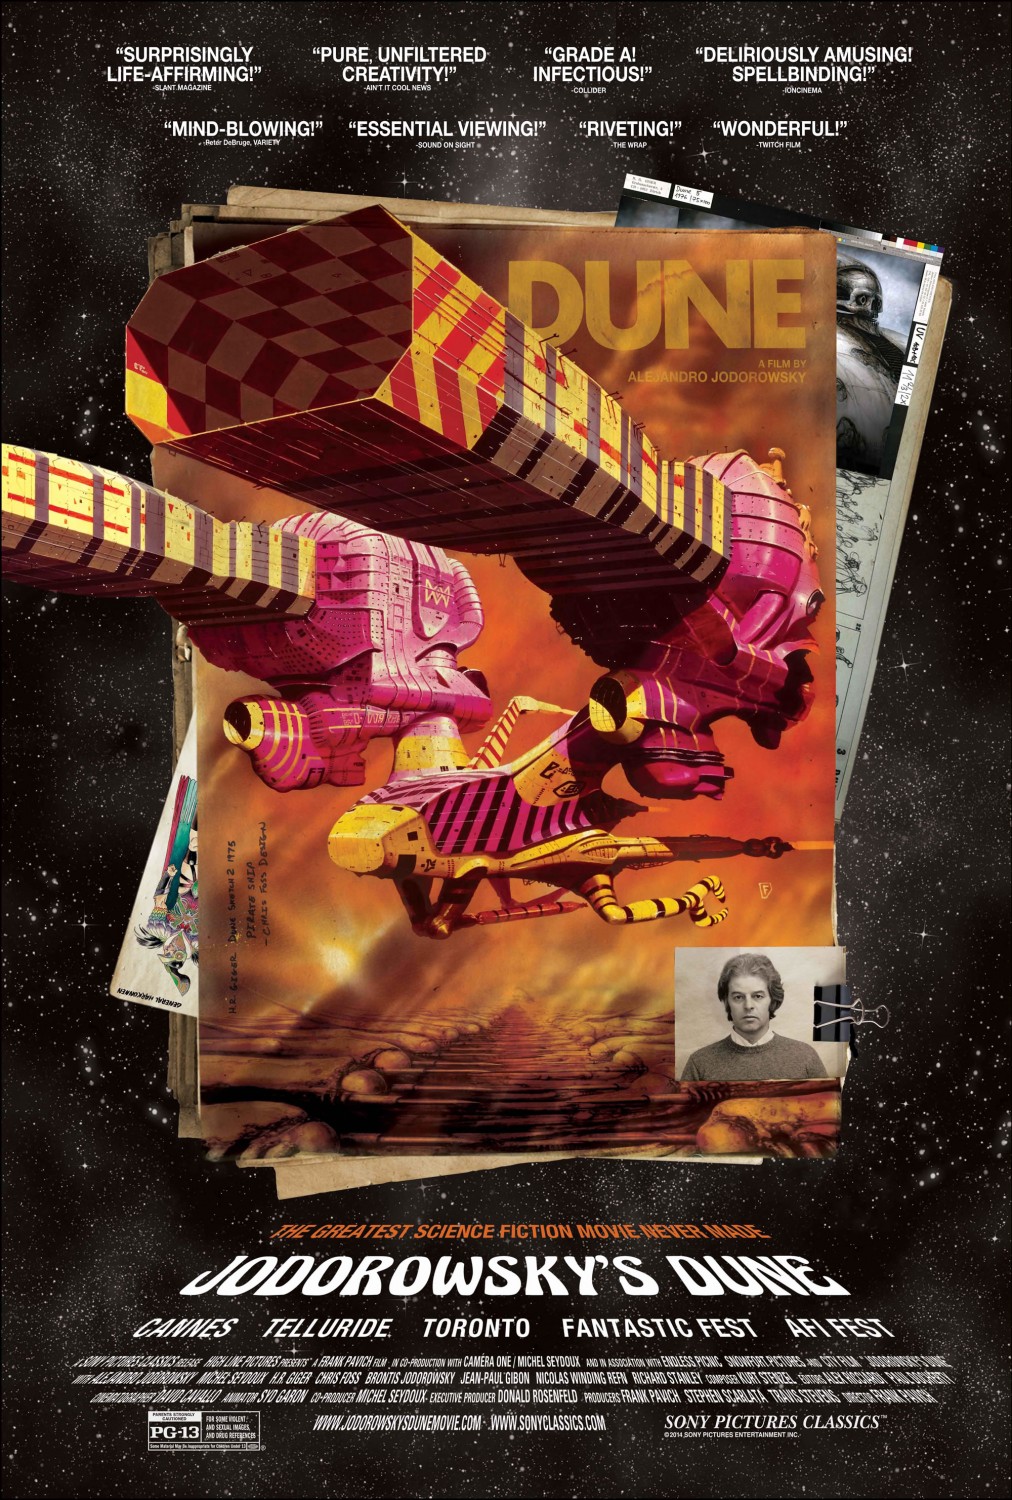 Extra Large Movie Poster Image for Jodorowsky's Dune (#3 of 3)